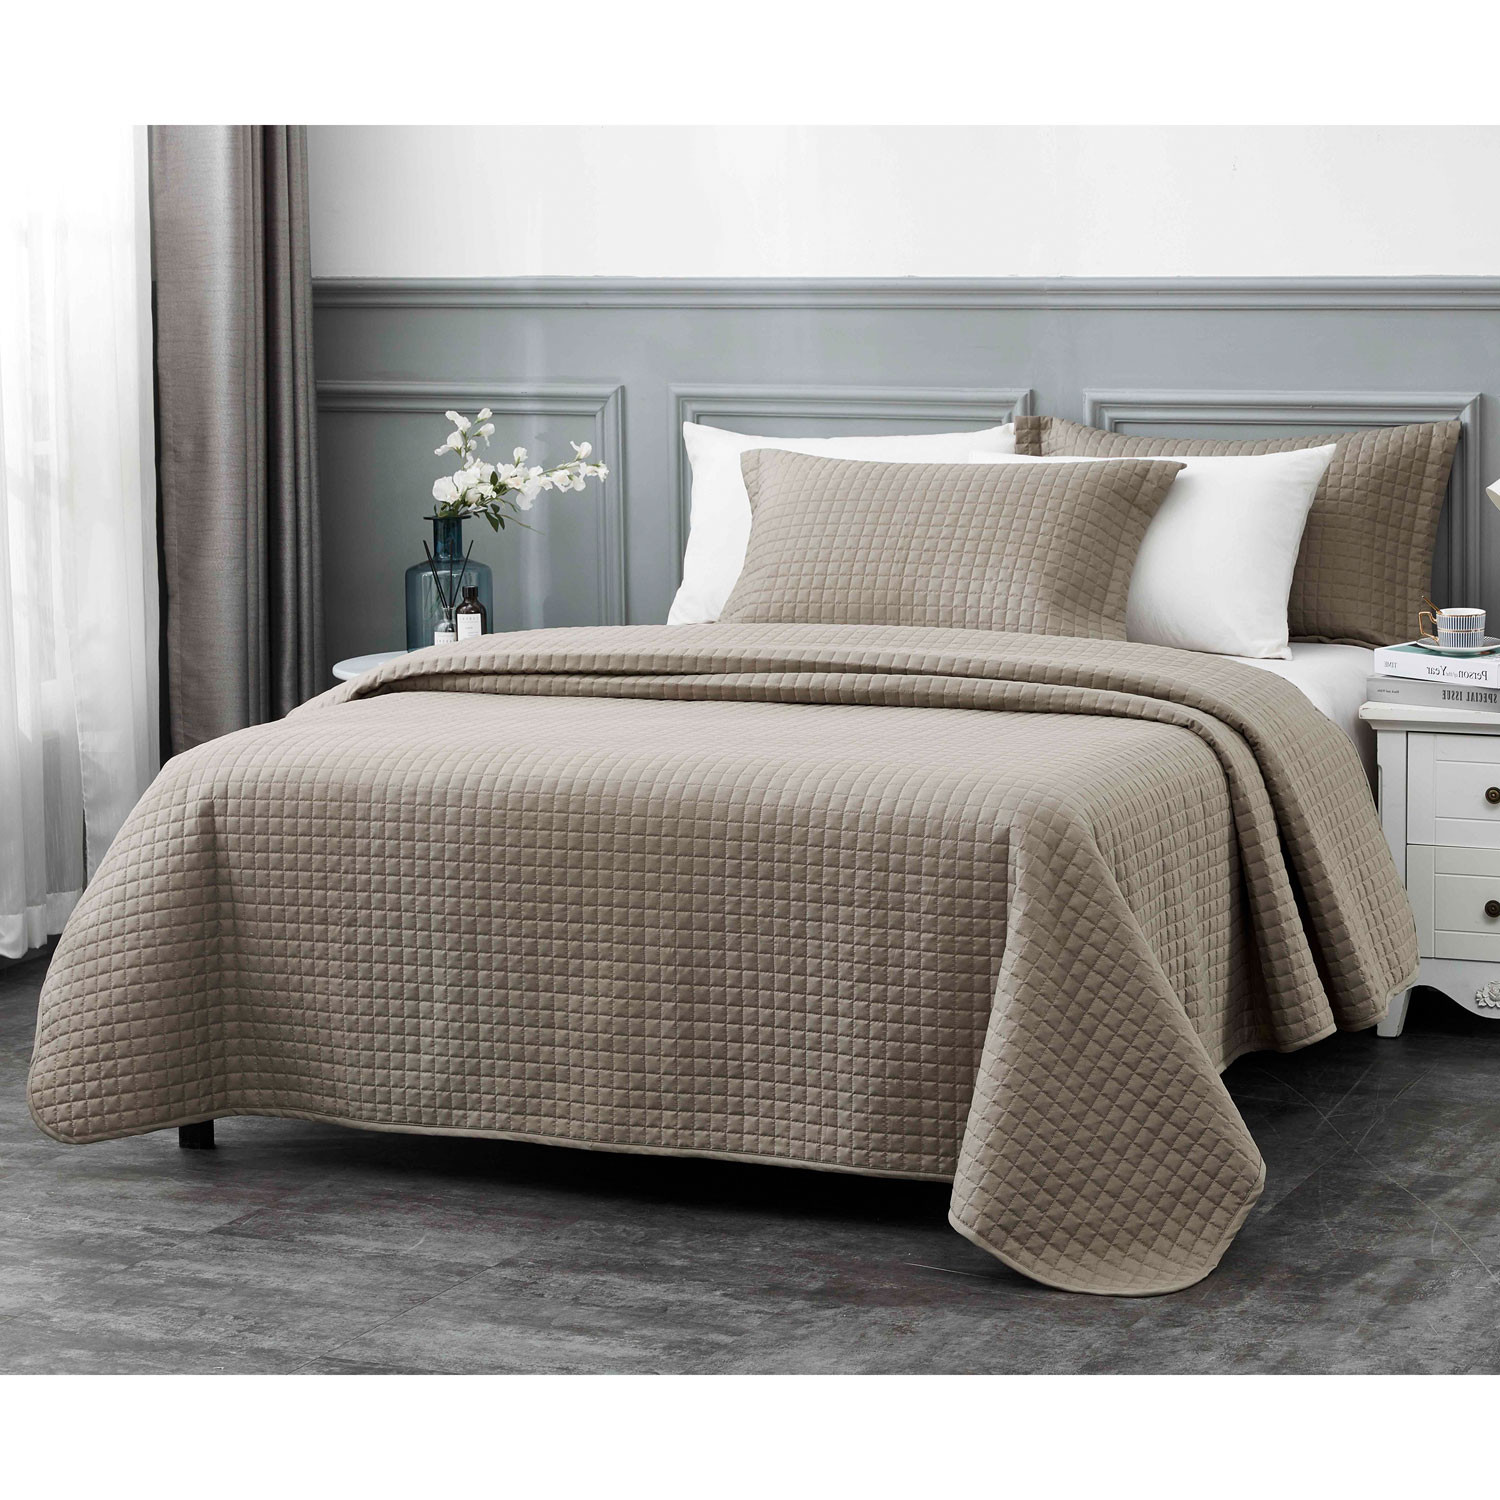 Millano Collection Classic 3-Piece Quilt Set - King - Taupe